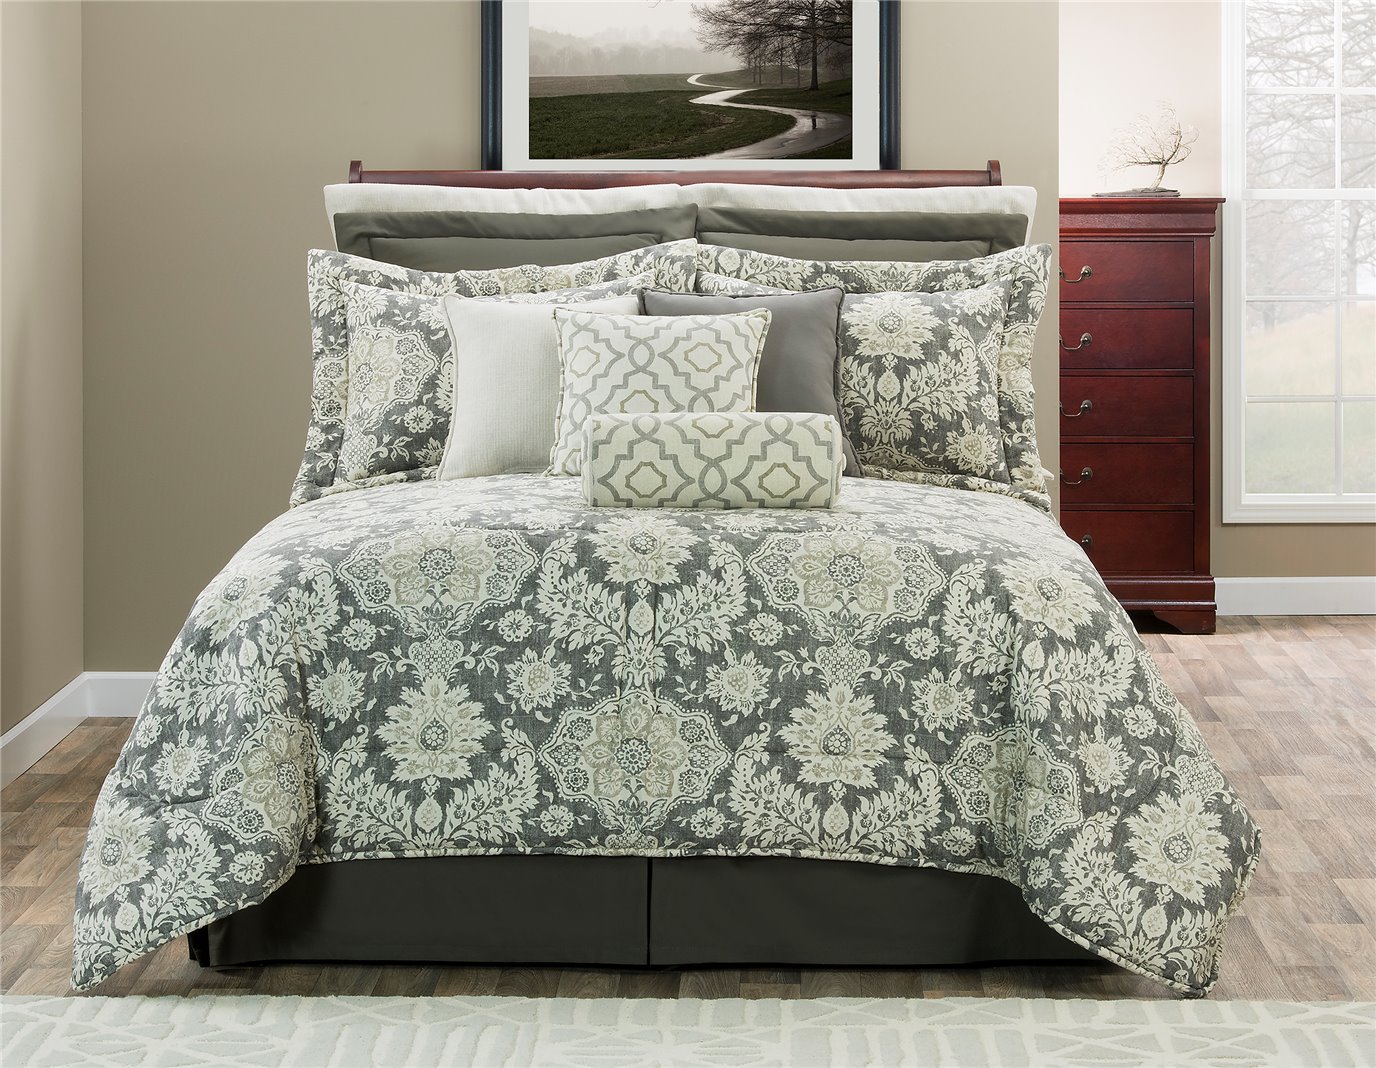 Belmont Metal King Bedspread By, Bed Bath And Beyond Oversized King Bedspreads